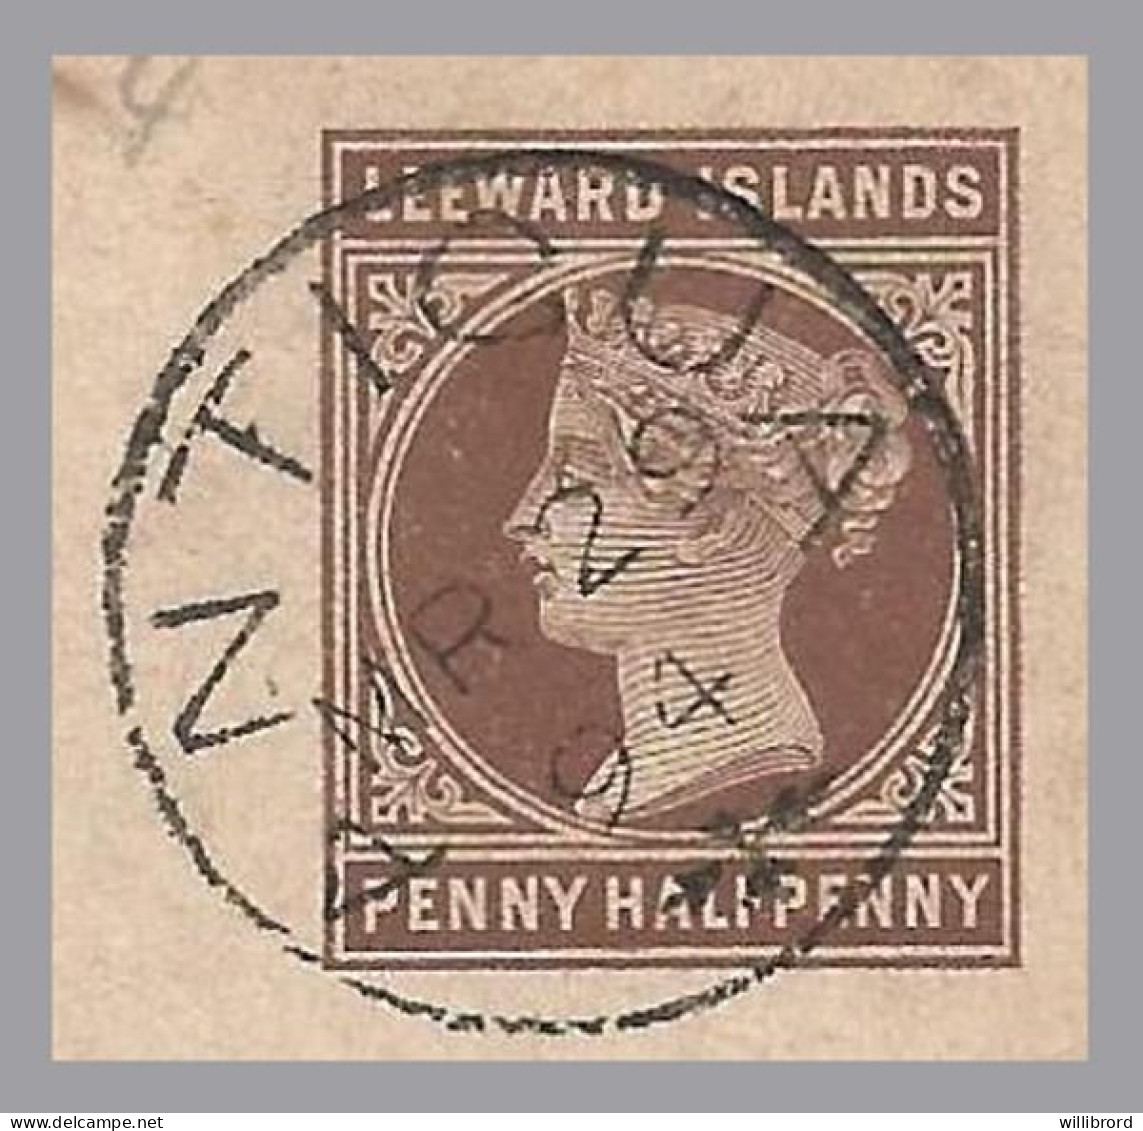 GREAT BRITAIN - LEEWARD ISLANDS - 1894 ANTIGUA 1½d+1½d QV Postal Stationery Card With Paid Reply - Used To Ulm, Germany - Storia Postale